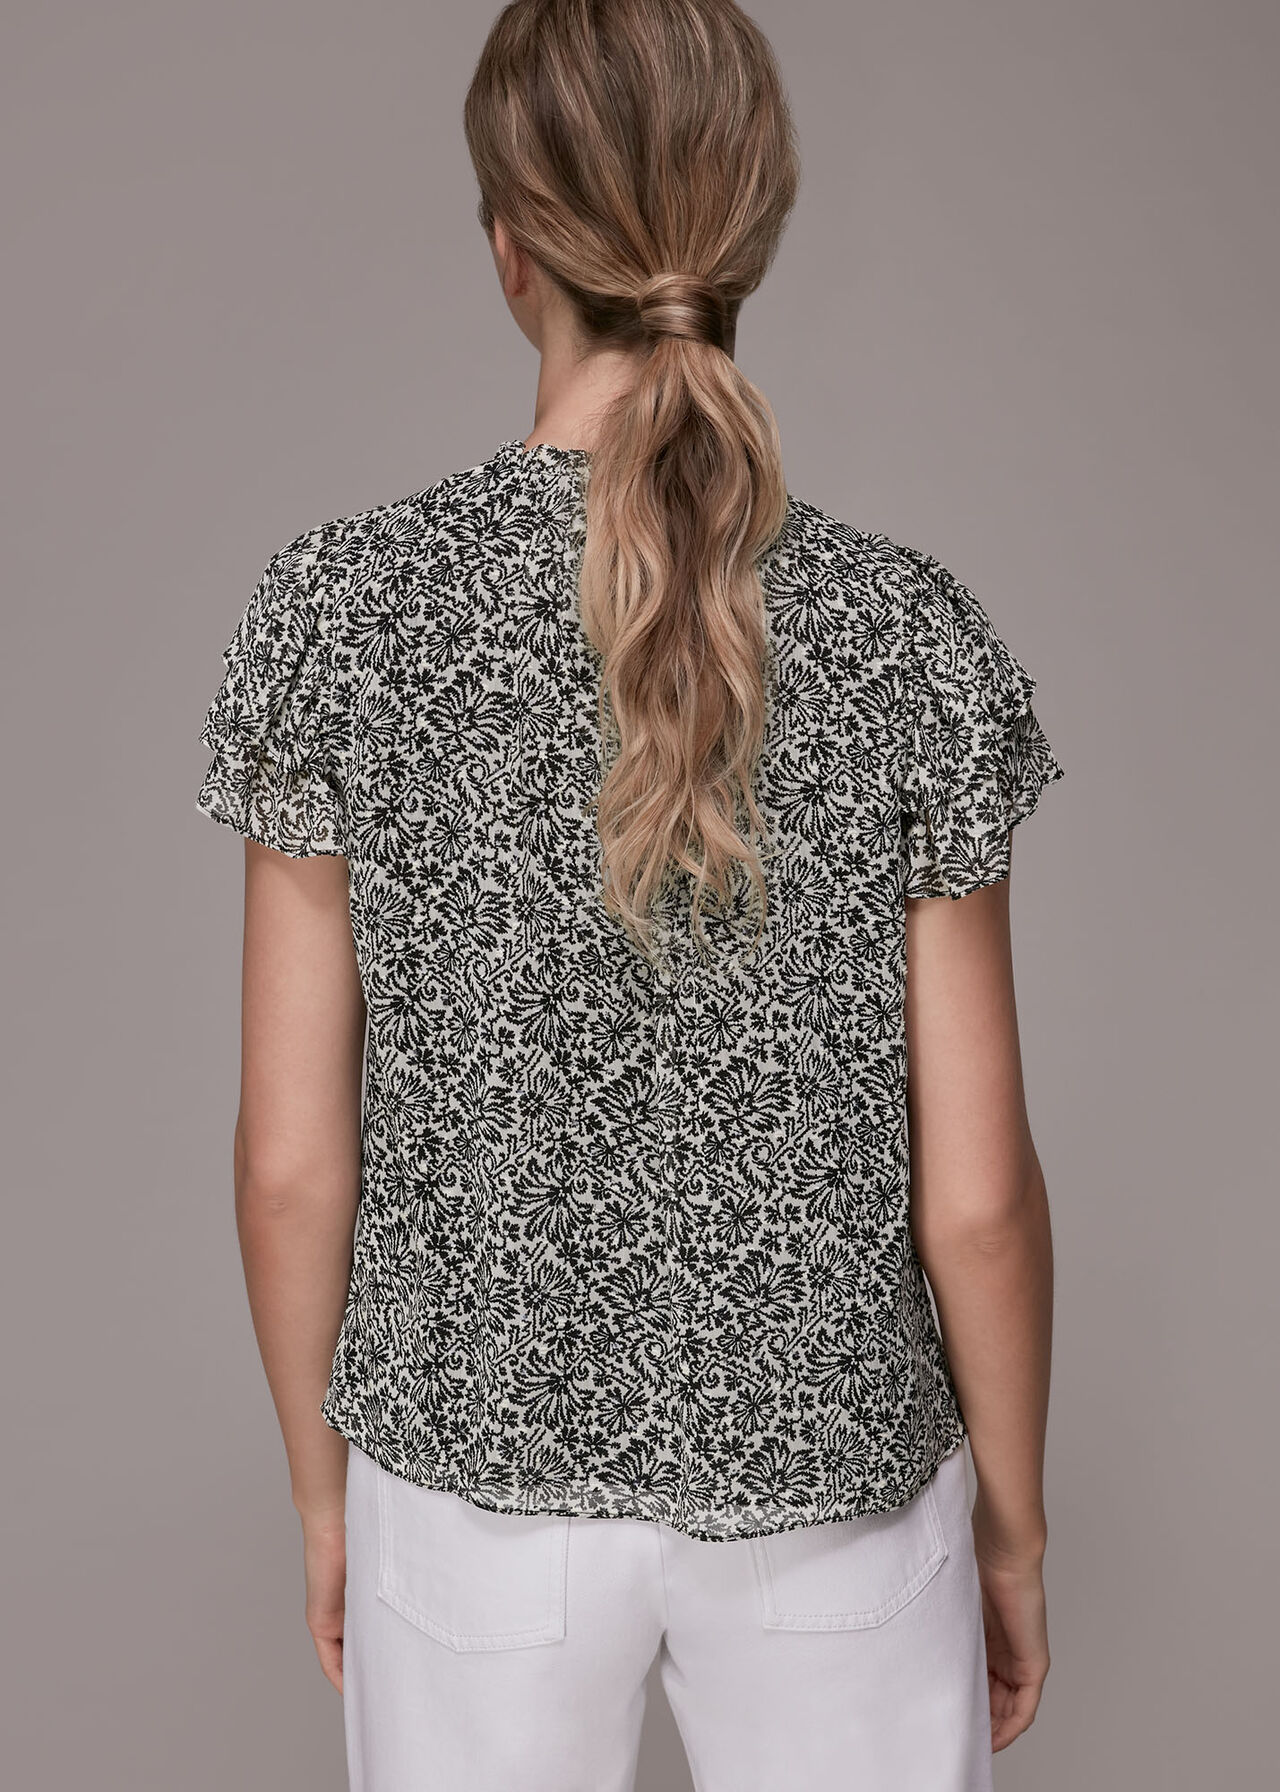 Indo Floral Print Top